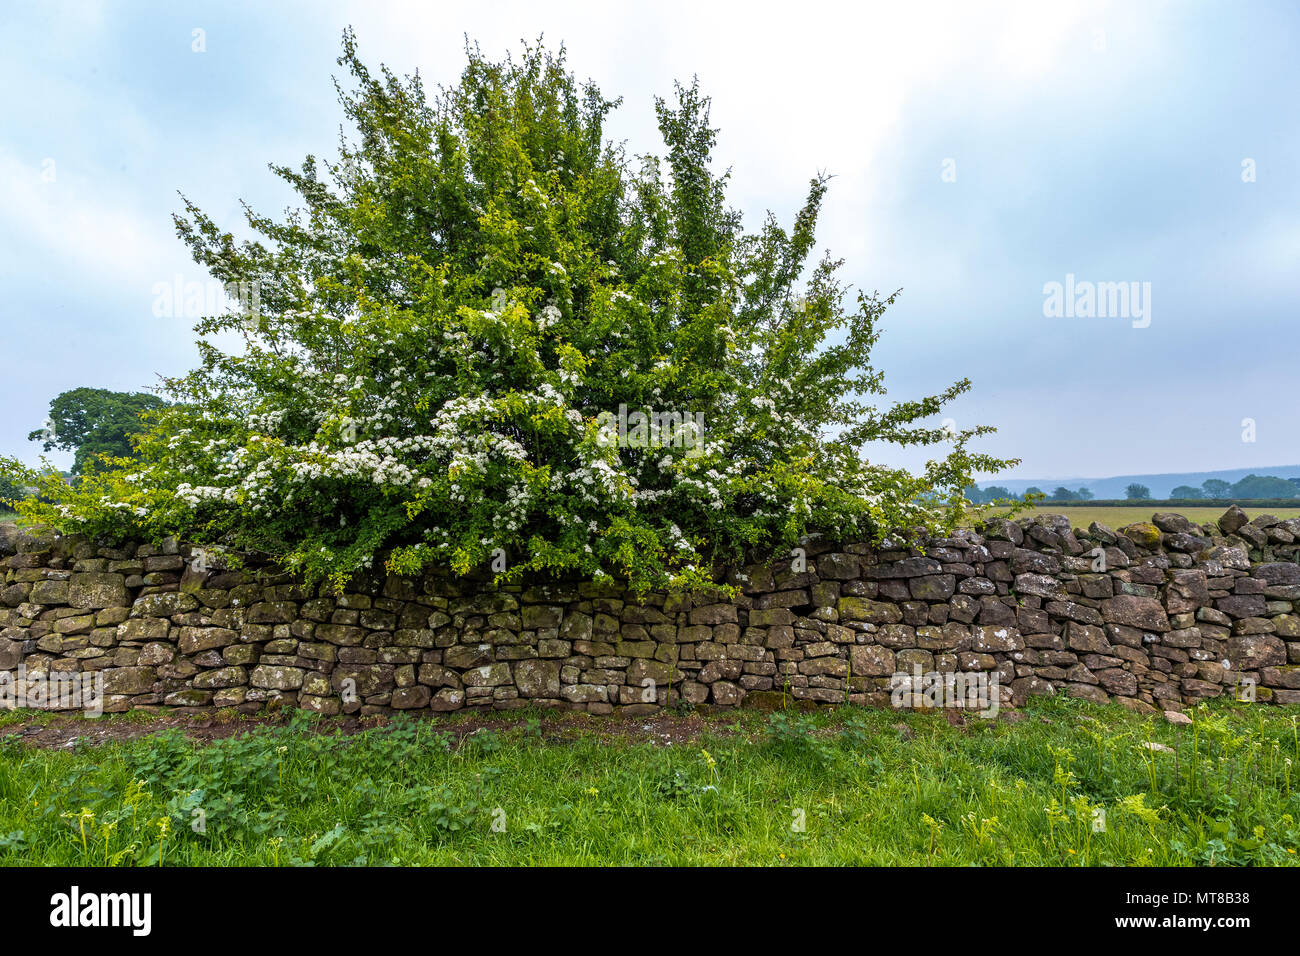 Hawthorn in blossom, spring. Humble by Nature May 2018 Stock Photo